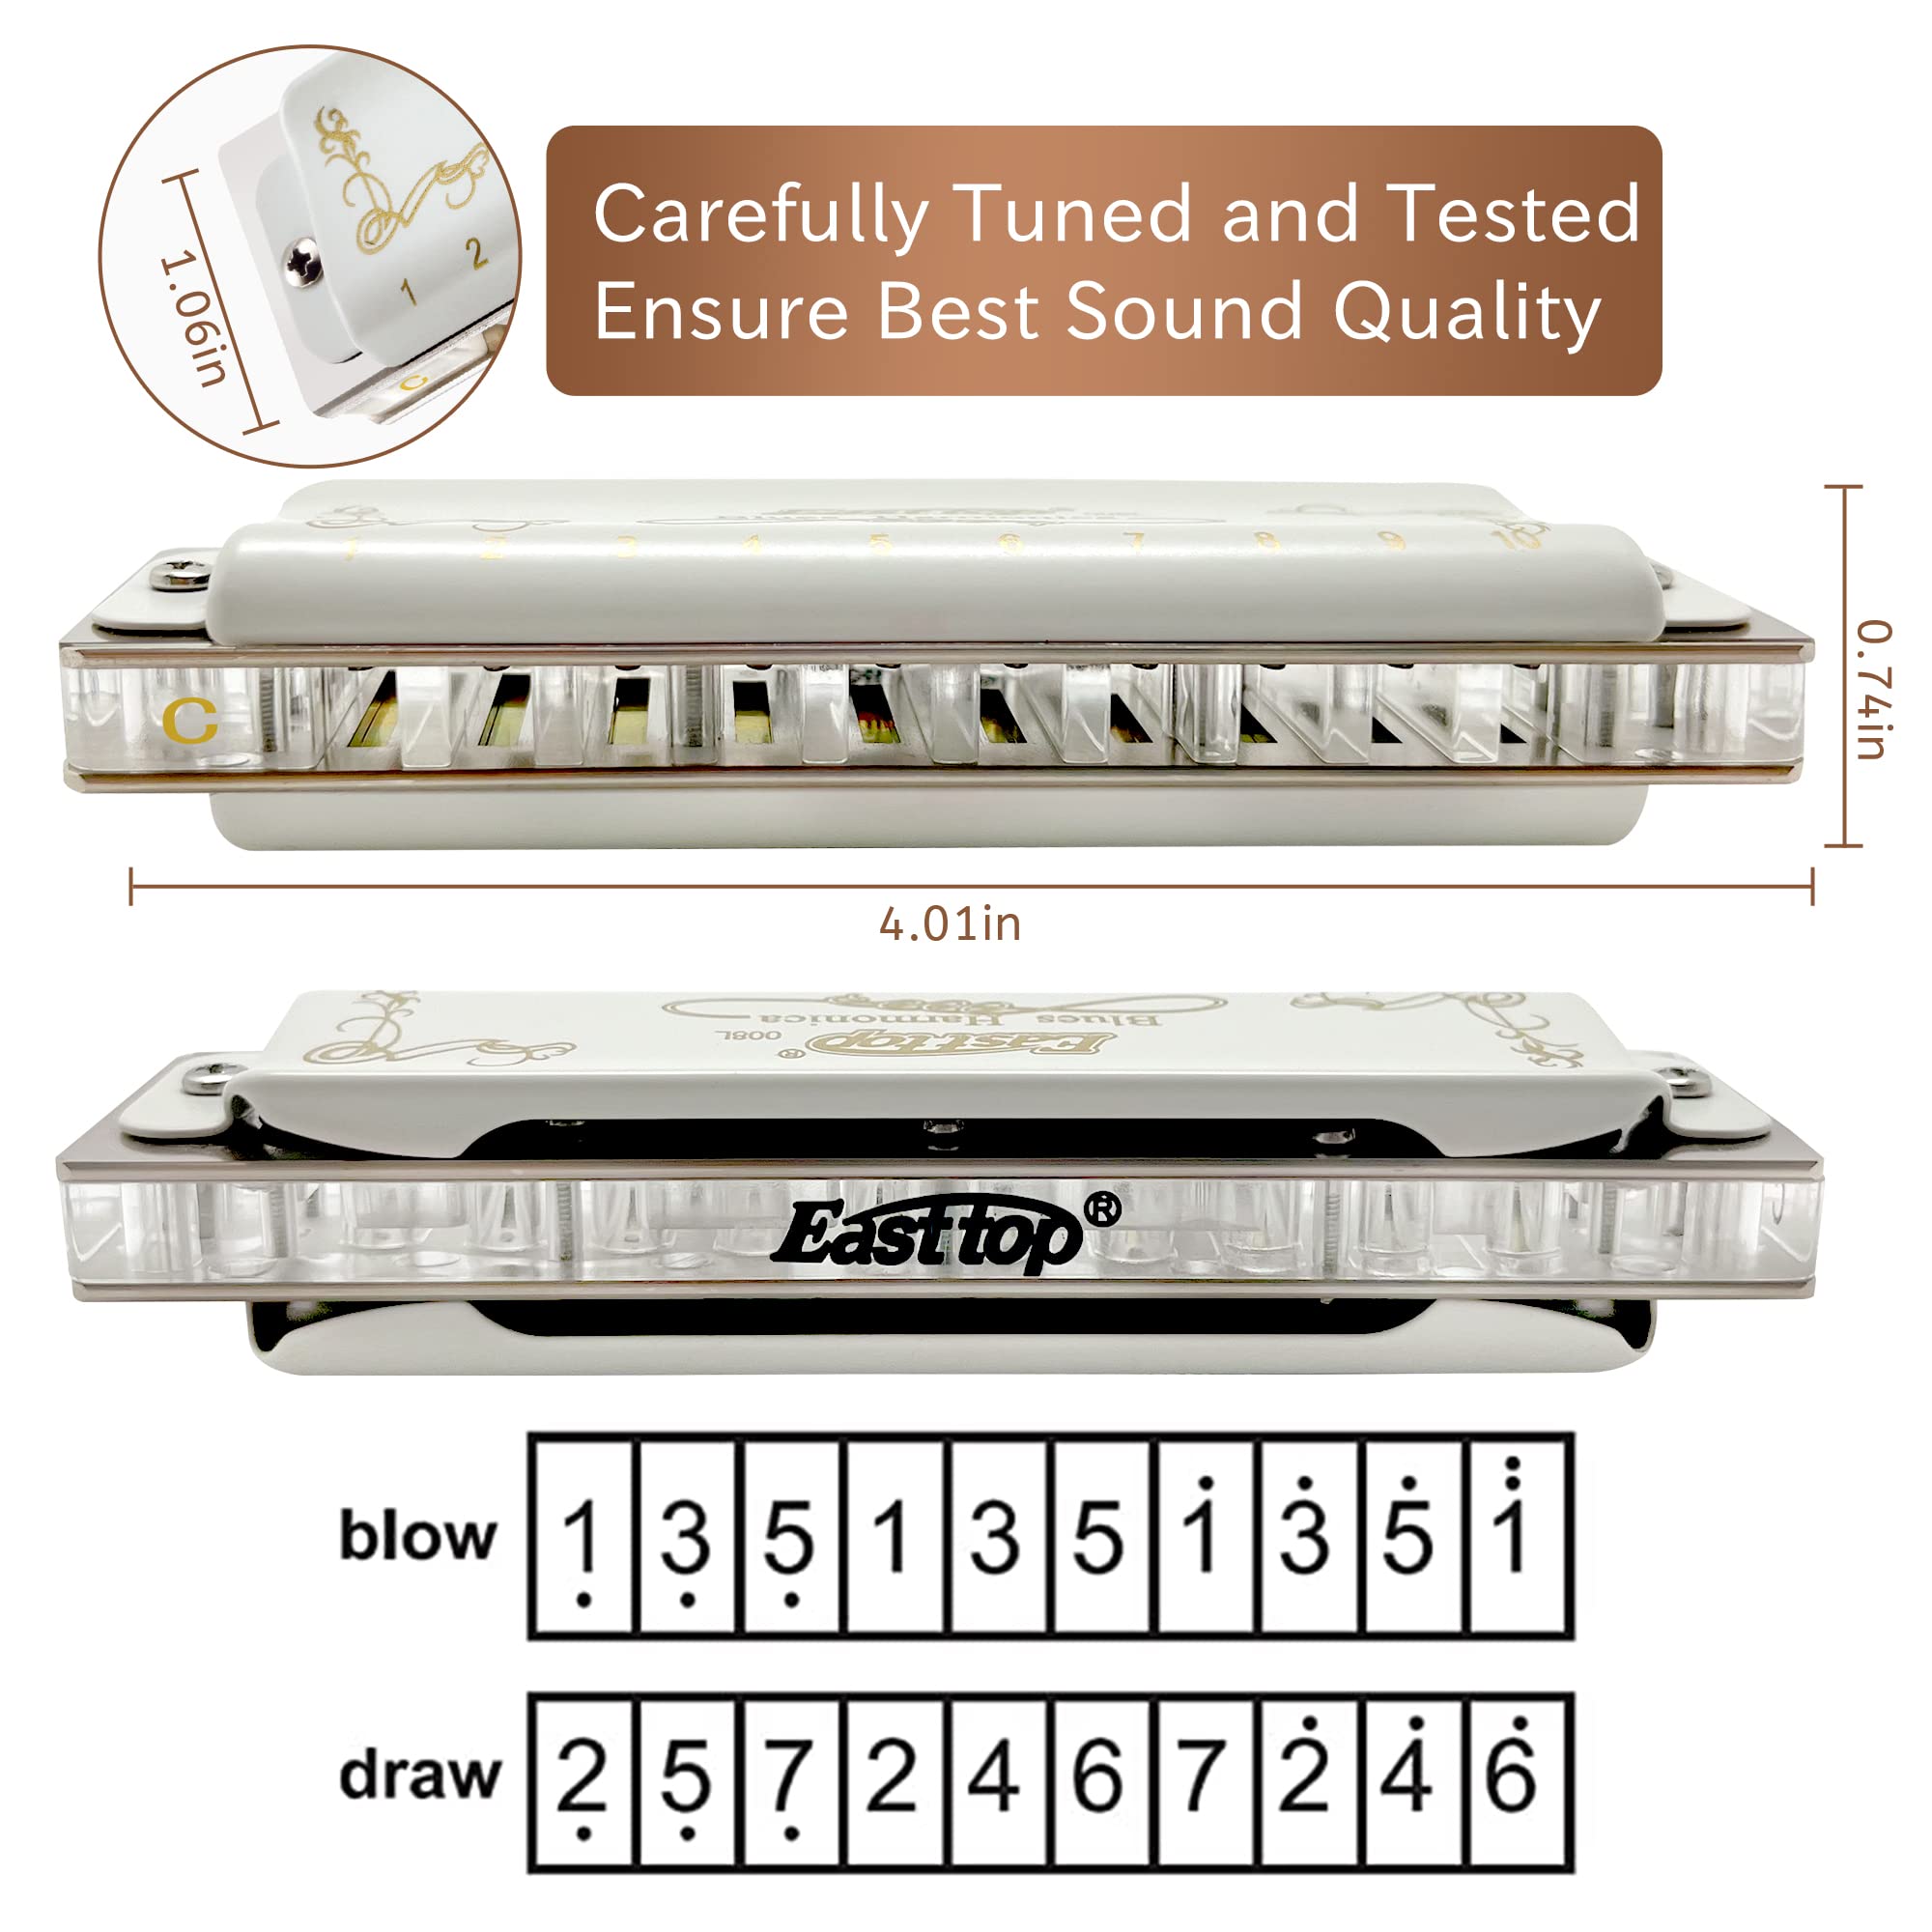 East top 10 Holes 20 Tones Diatonic Blues Harmonica Key of C with White Cover, T008L Harmonica for Adults, Professional Player, Beginner and Students(T008L) - Easttop harmonica